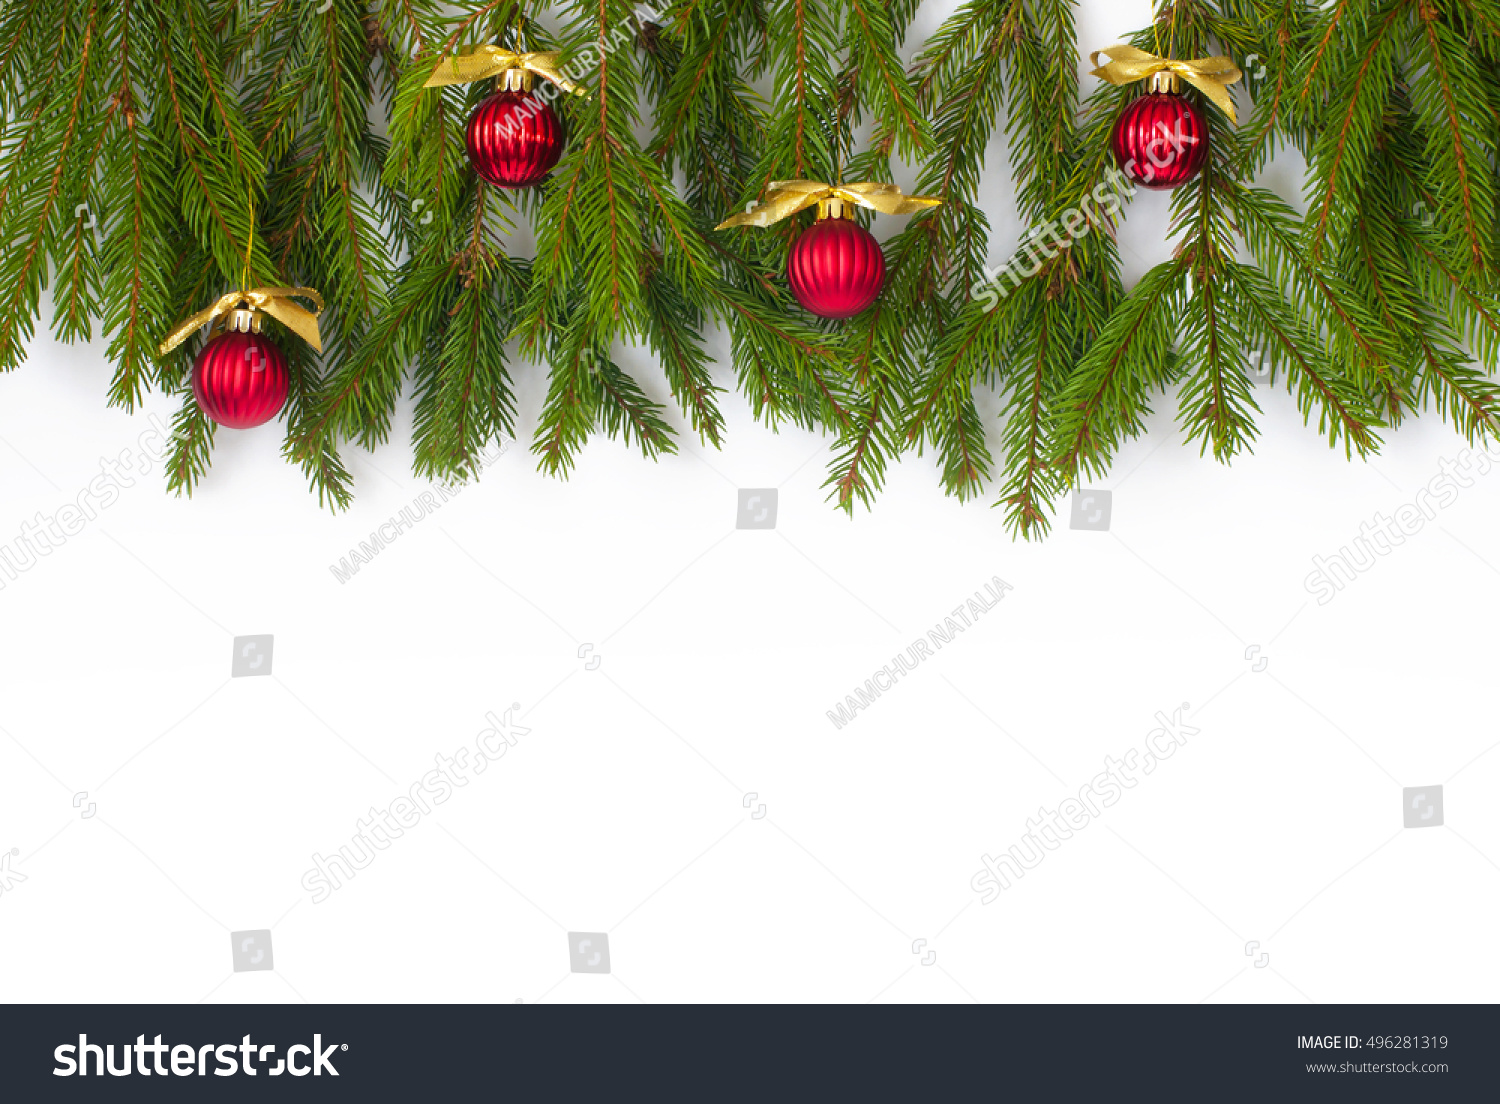 Christmas background with green tree branches on wood, red balls and golden ribbons #496281319